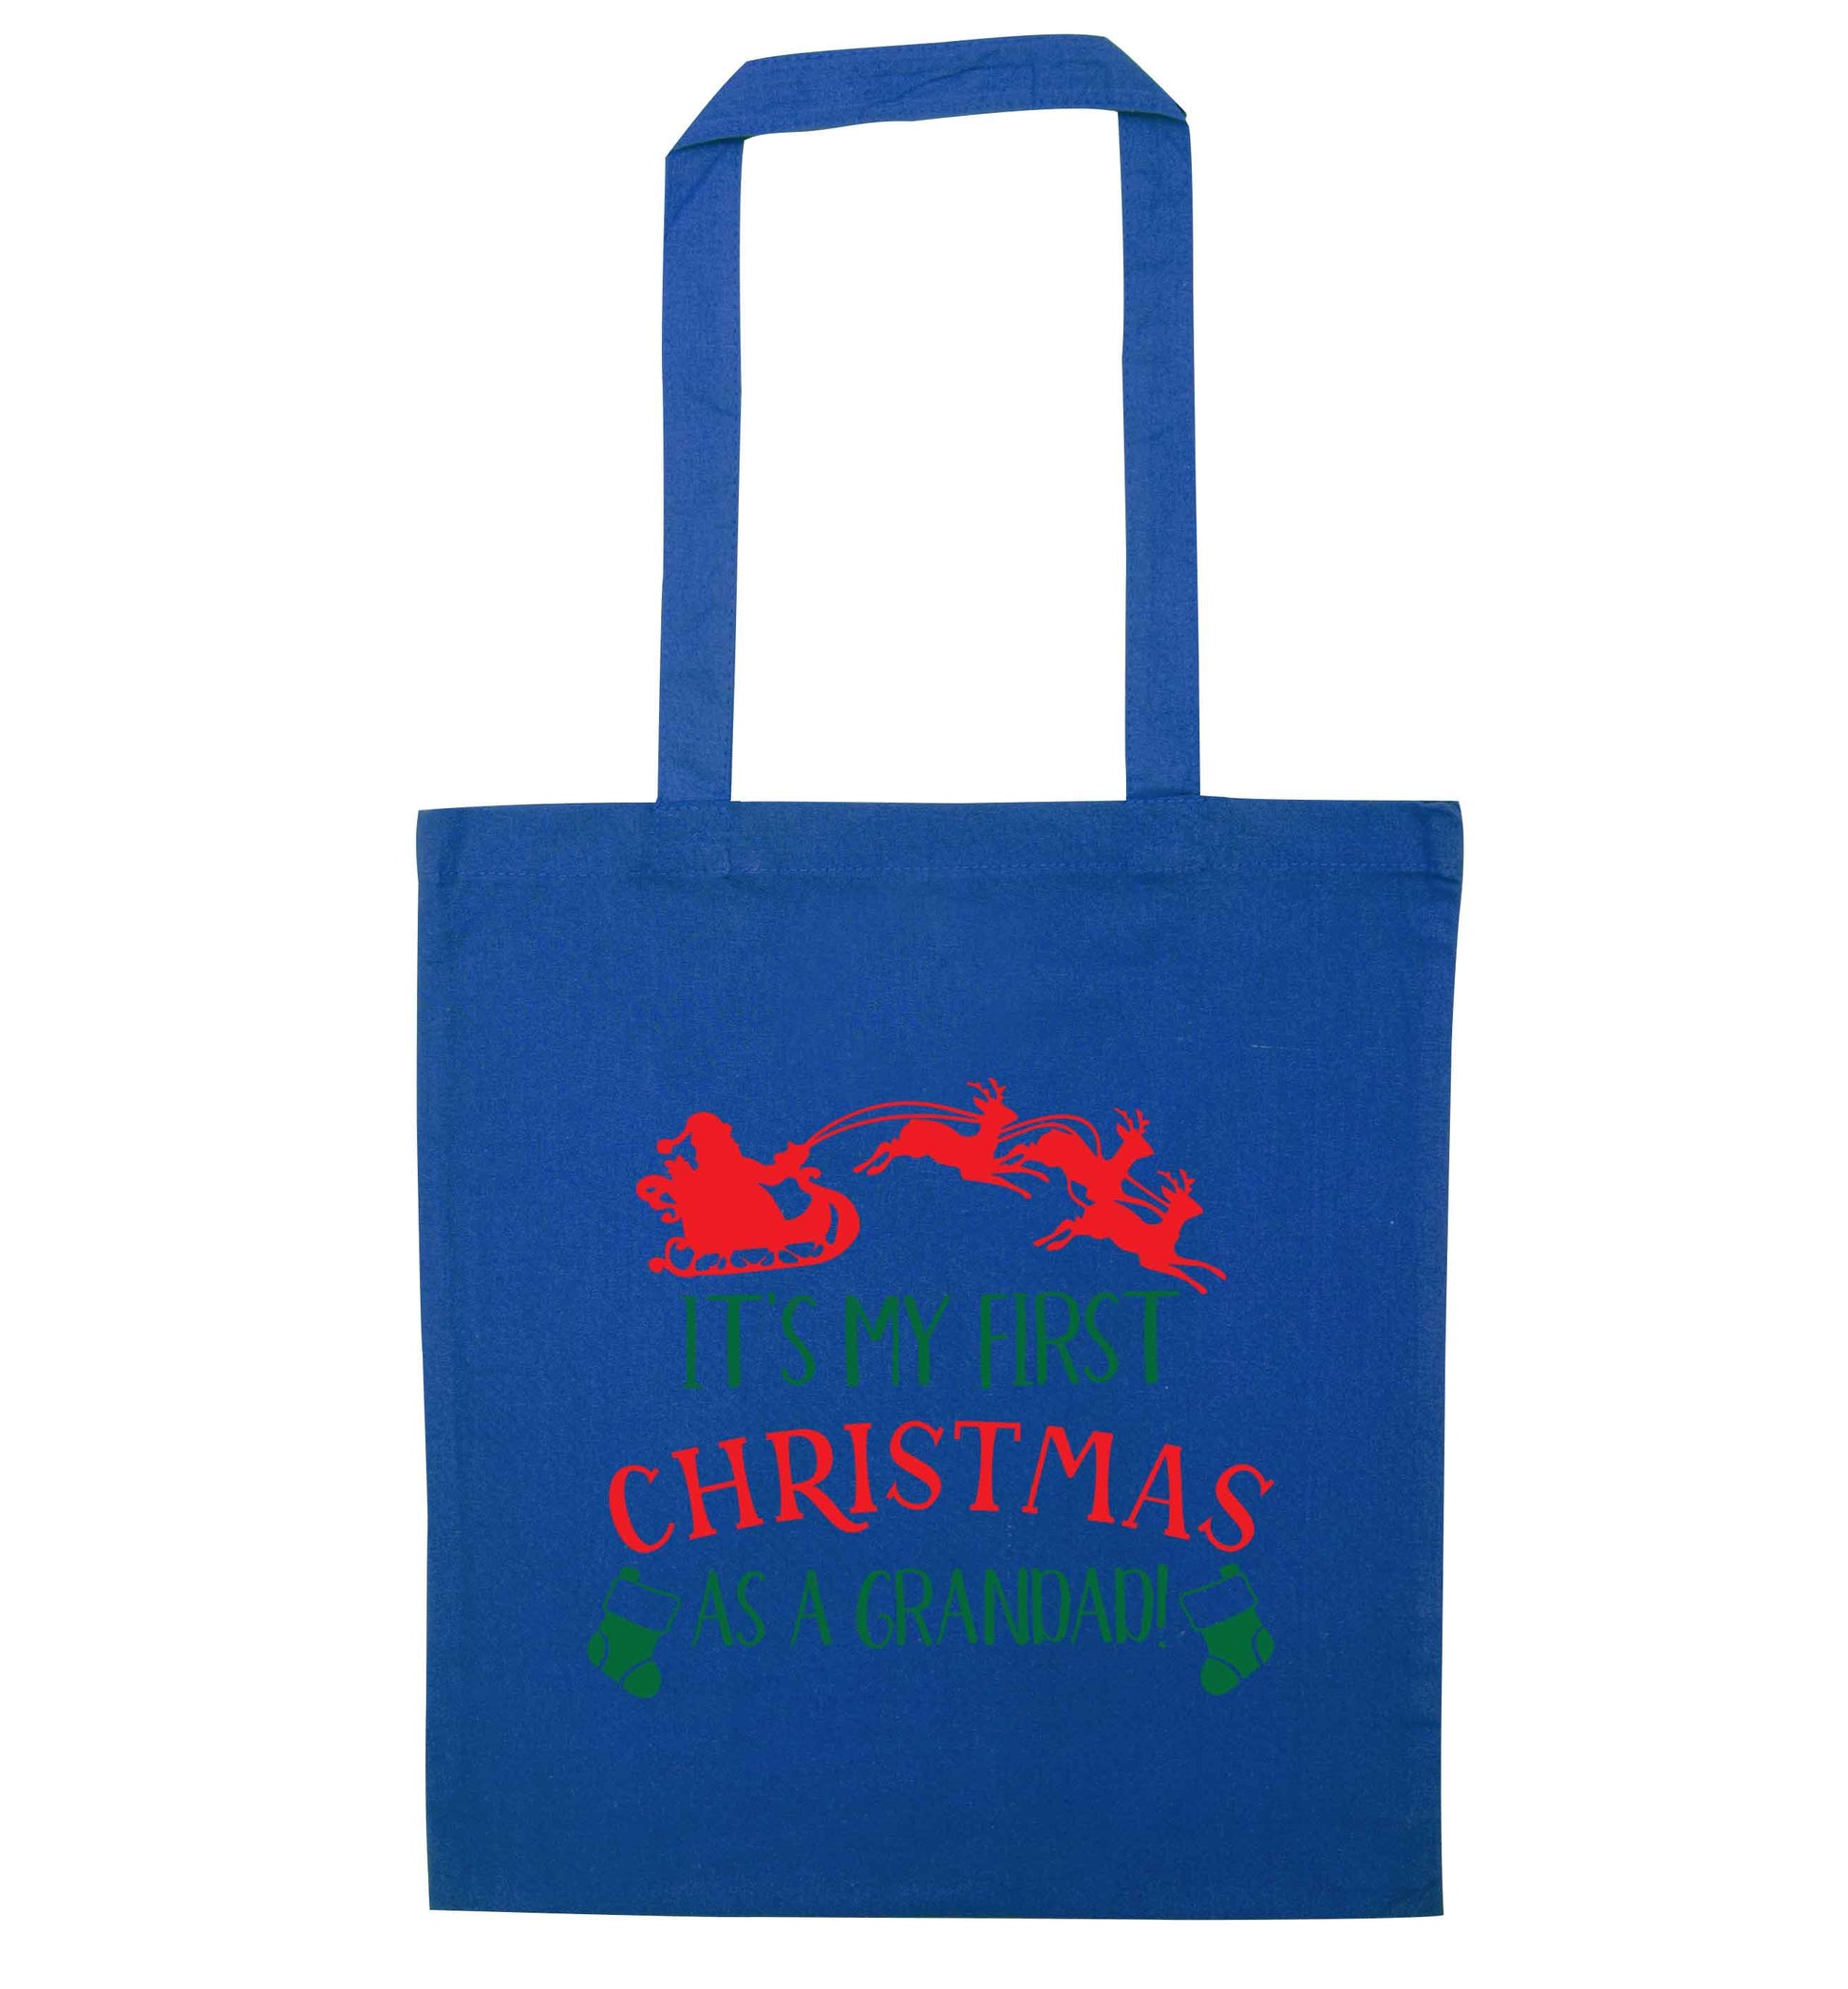 It's my first Christmas as a grandad! blue tote bag